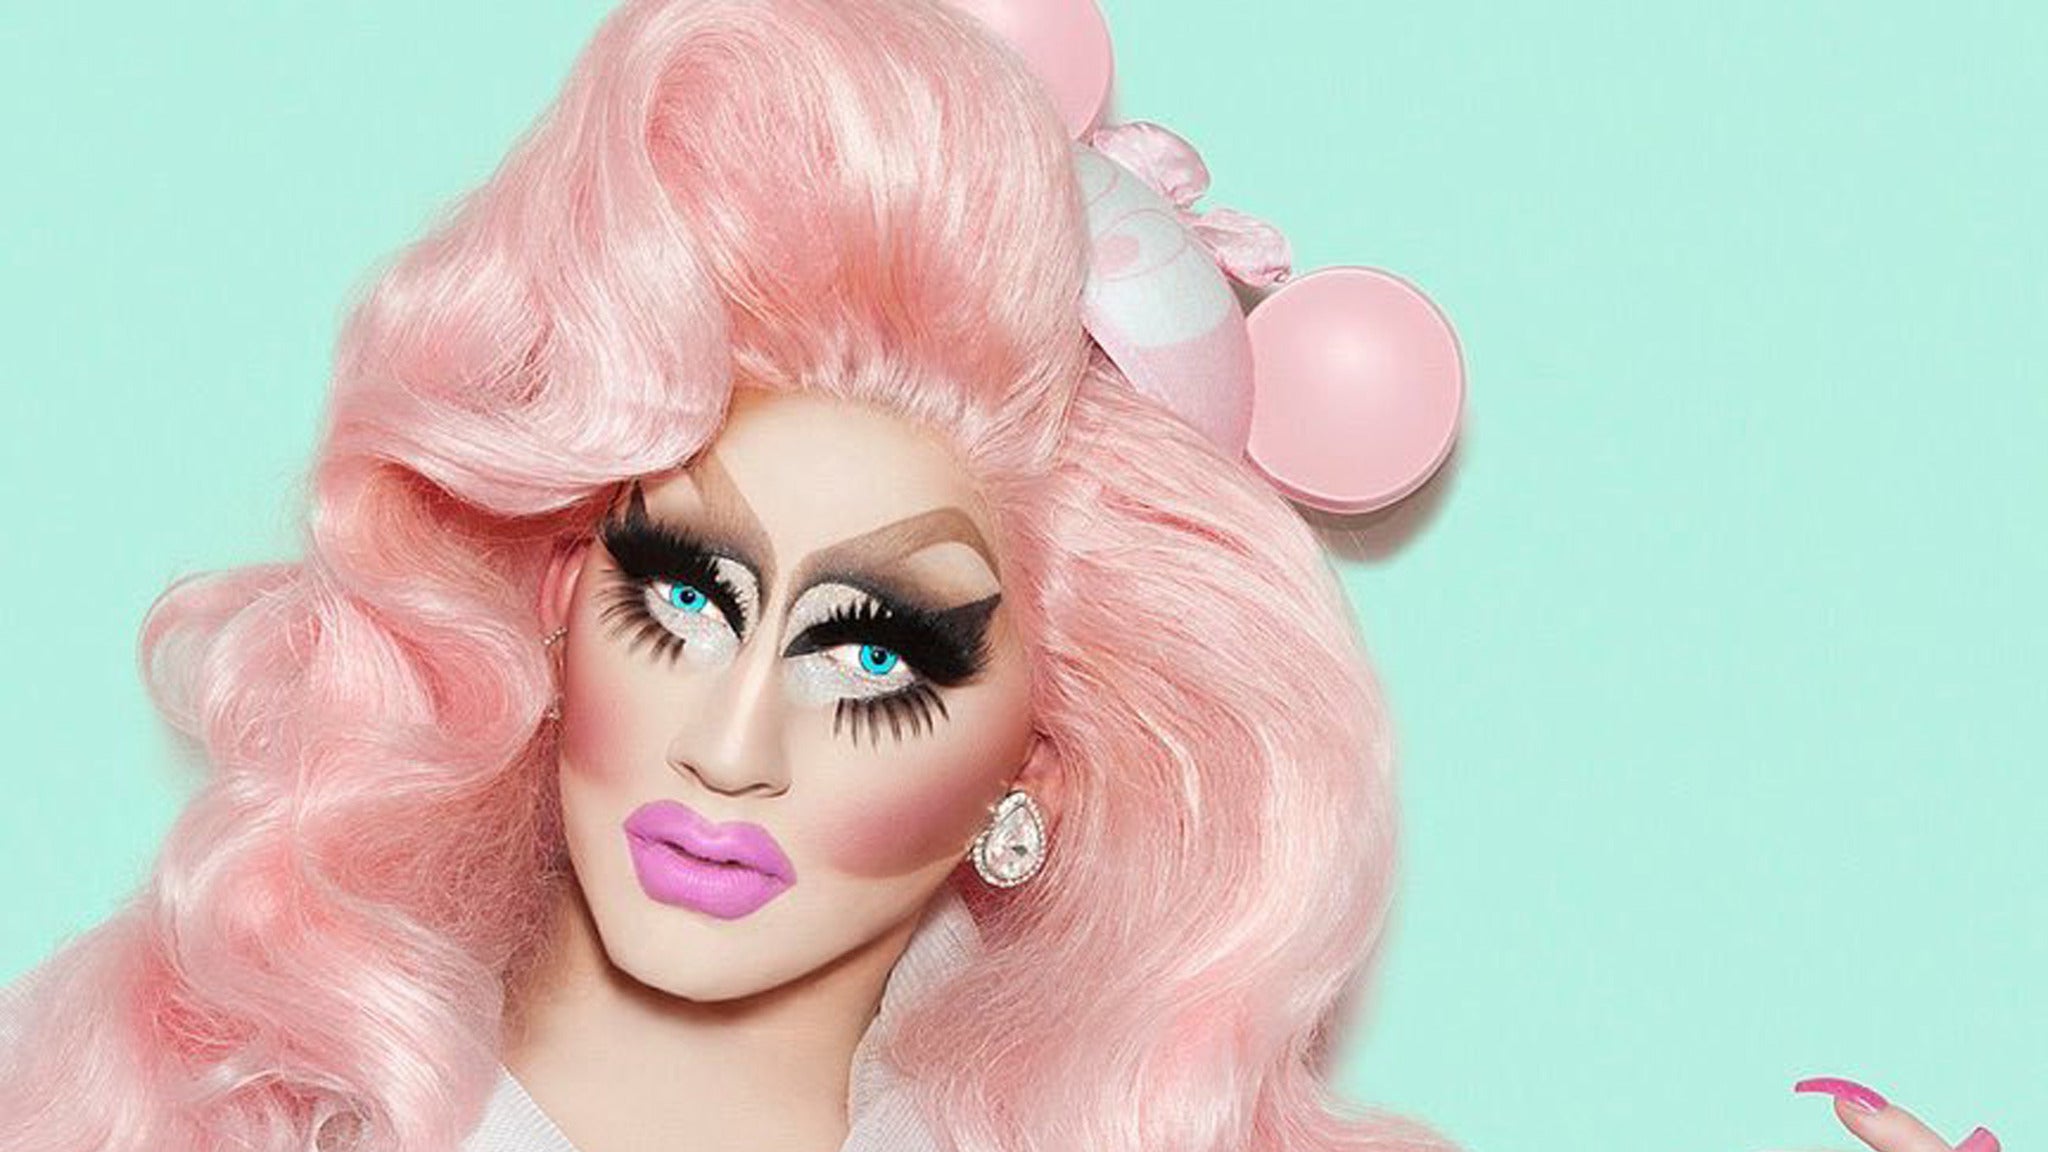 Trixie Mattel: Grown Up in Portland promo photo for Artist presale offer code